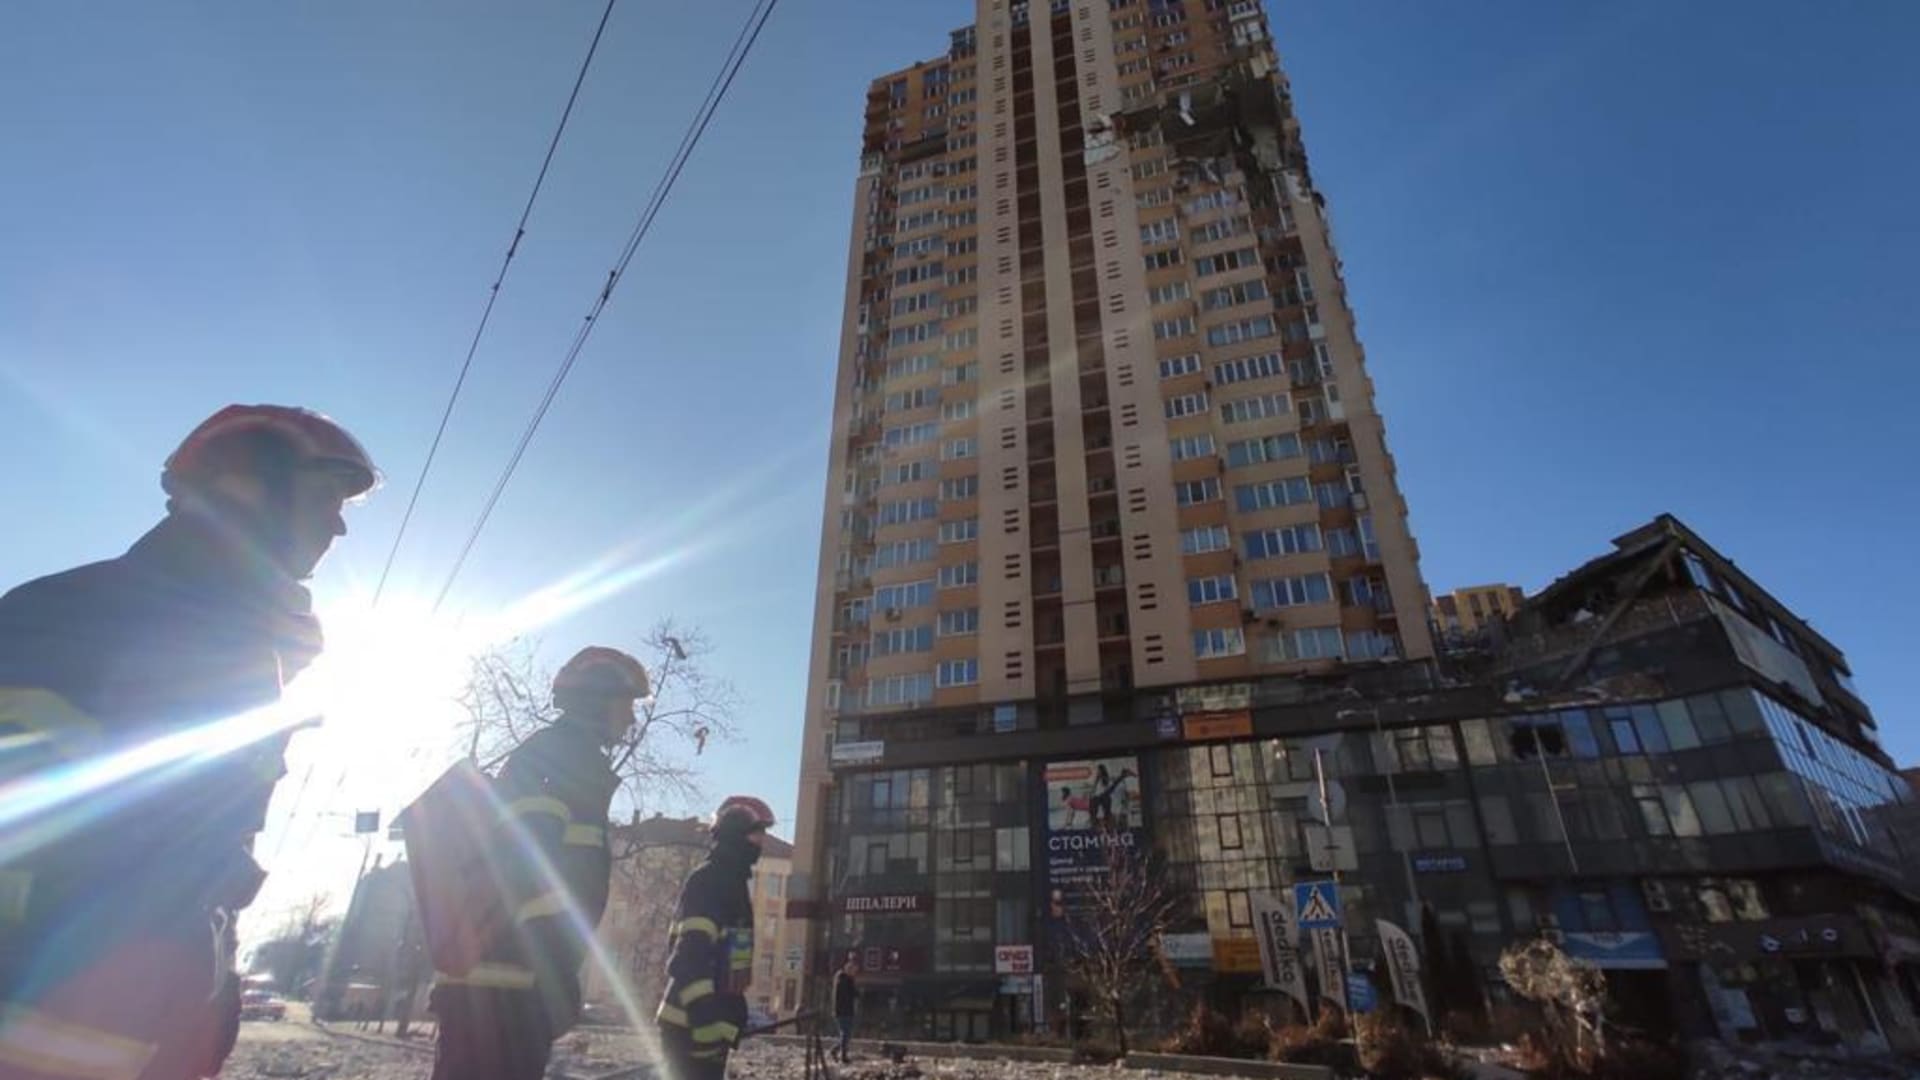 Residential building is seen damaged after an attack on a residential building during Russiaâs military intervention in Kyiv, Ukraine on February 26, 2022.